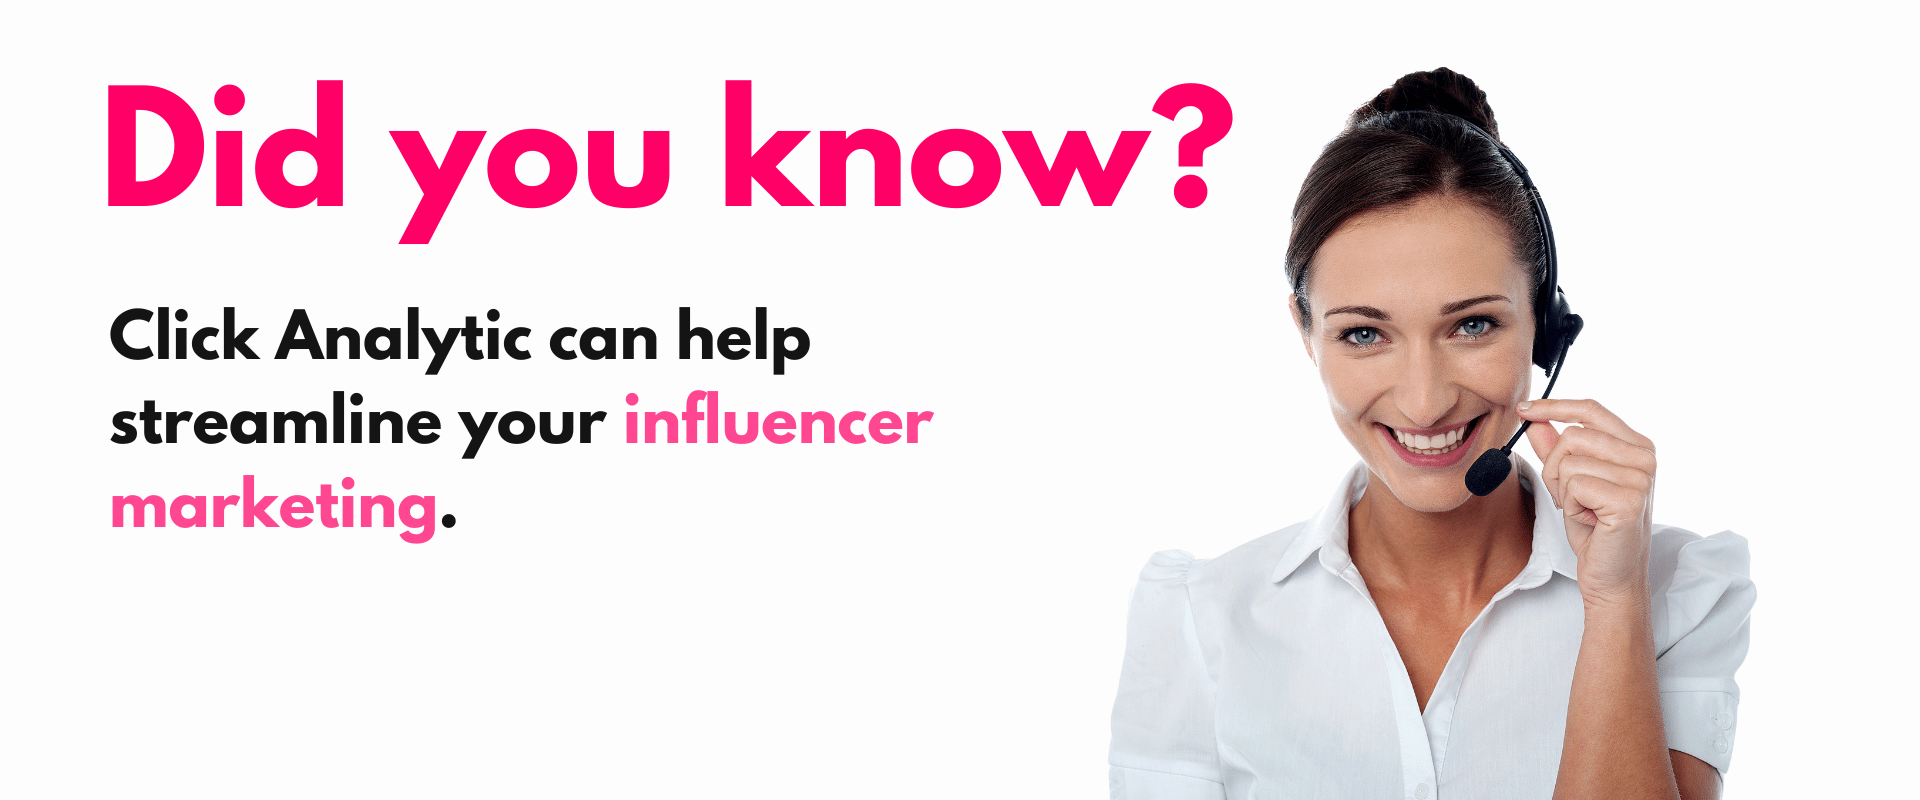 Click Analytic can help streamline influencer marketing.